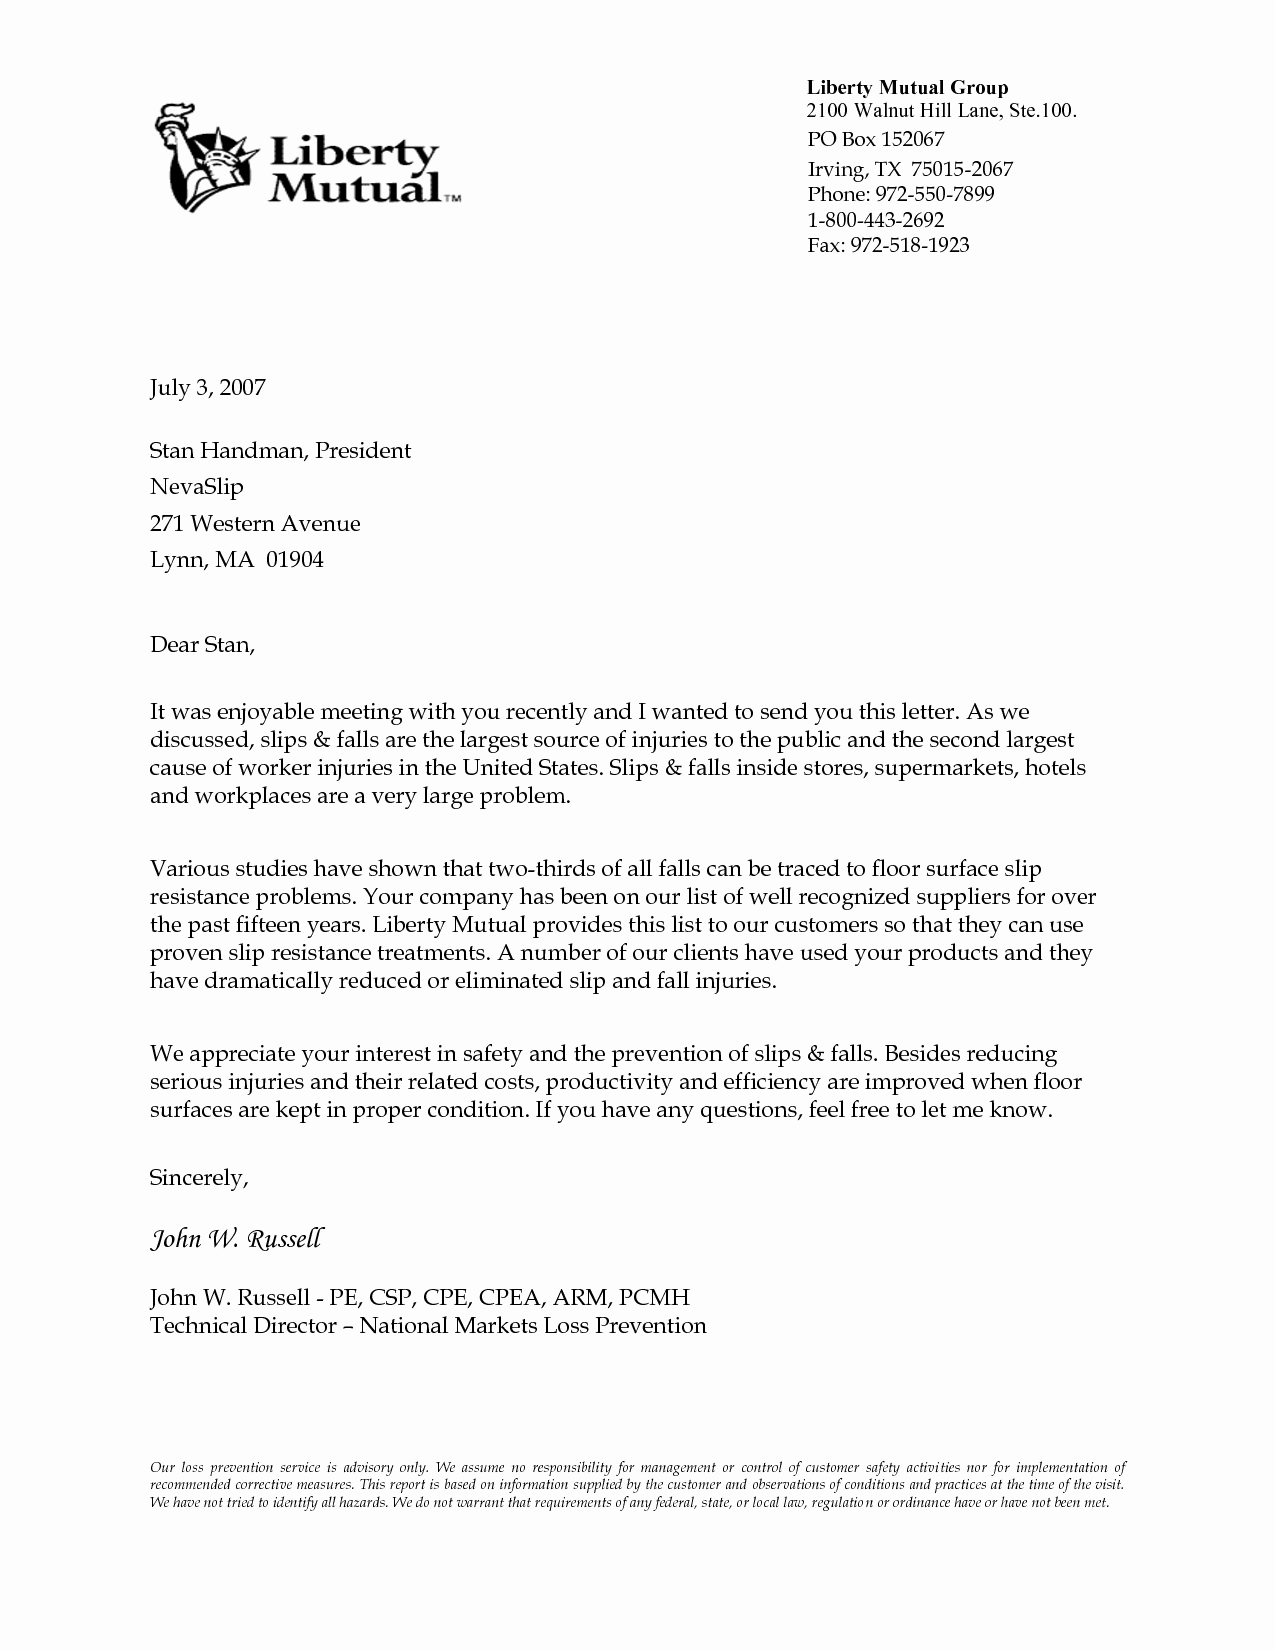 Formal Business Letter Template Word Luxury Business Letter Template